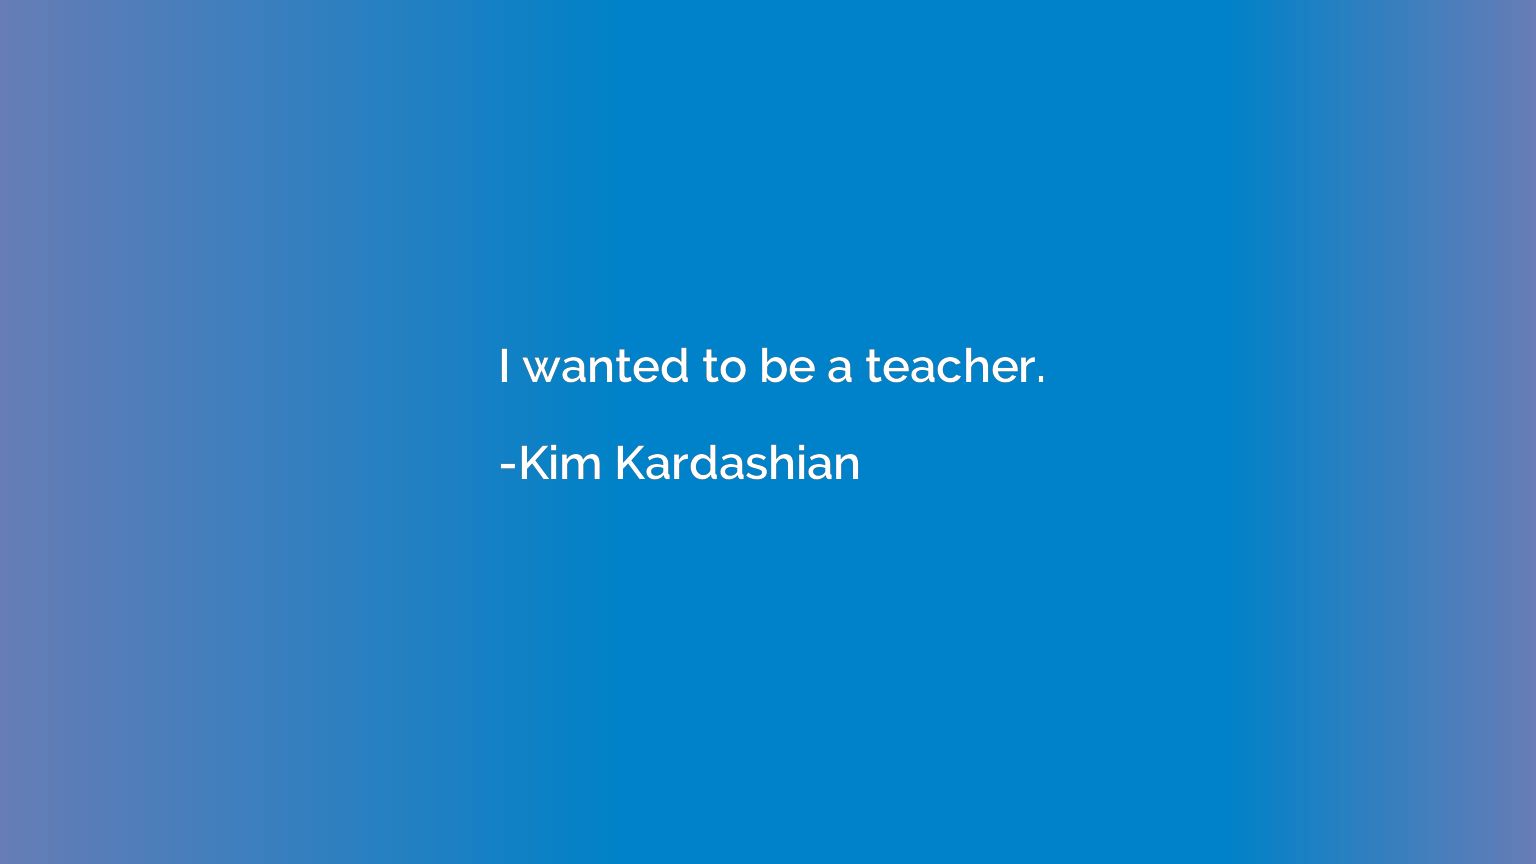 I wanted to be a teacher.